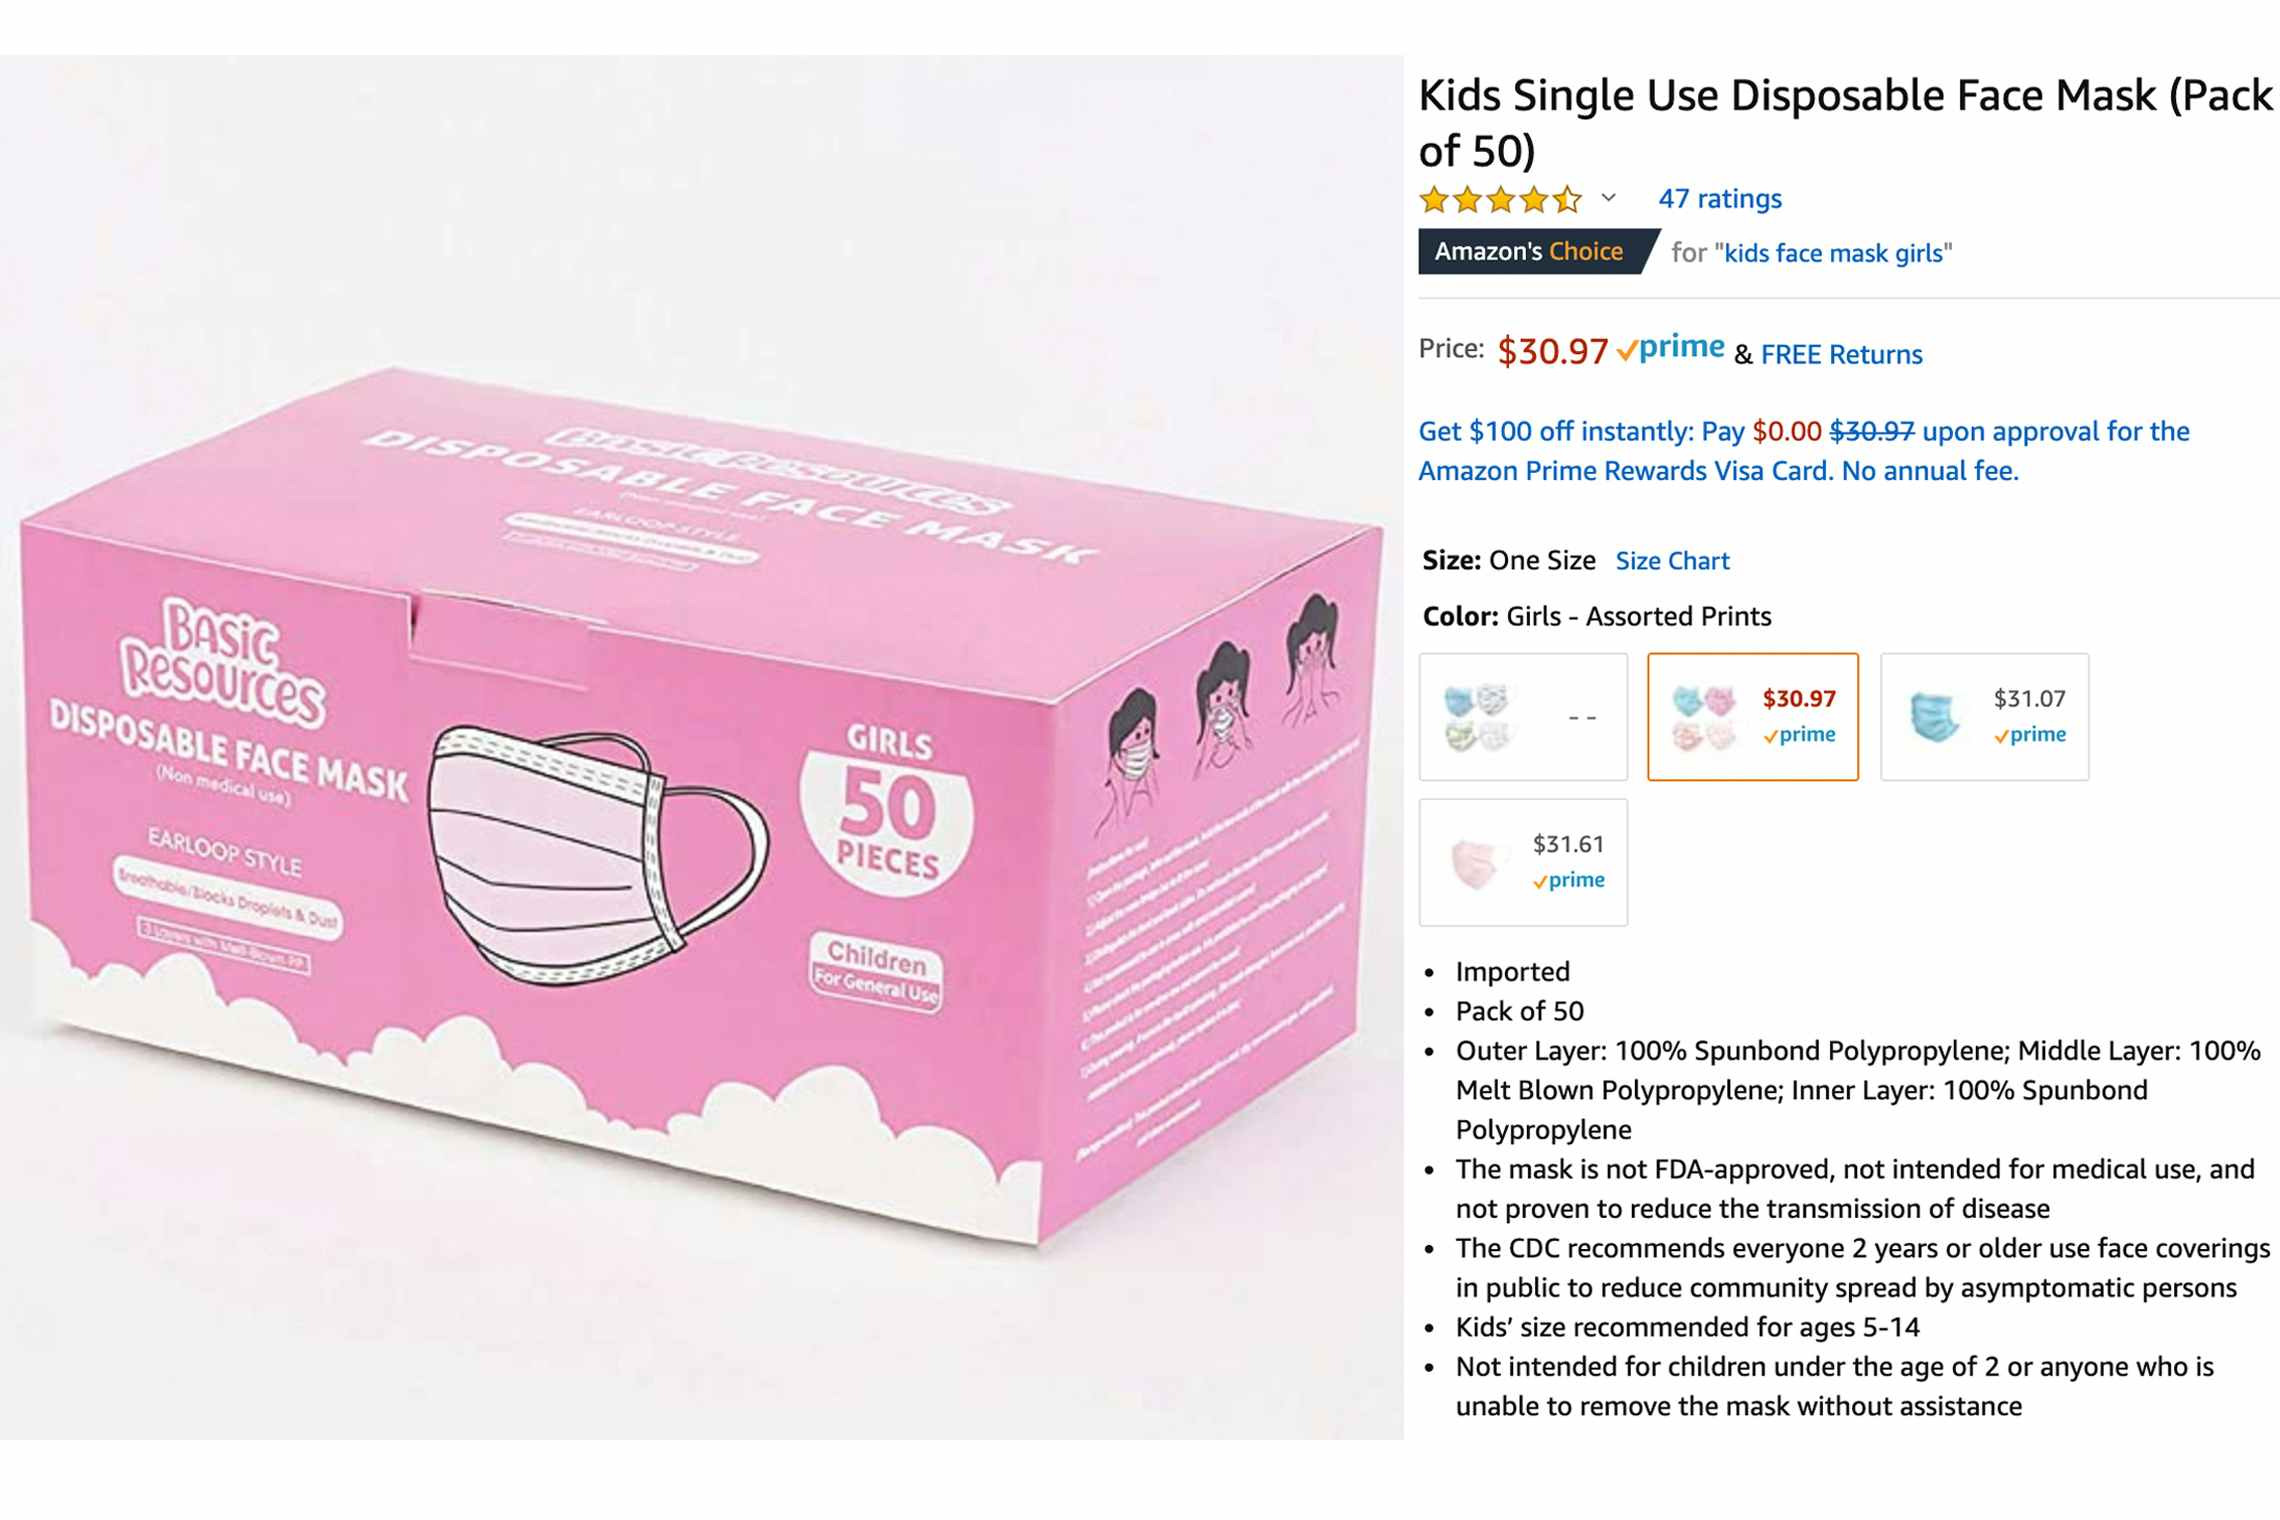 Amazon disposable face mask for kids.